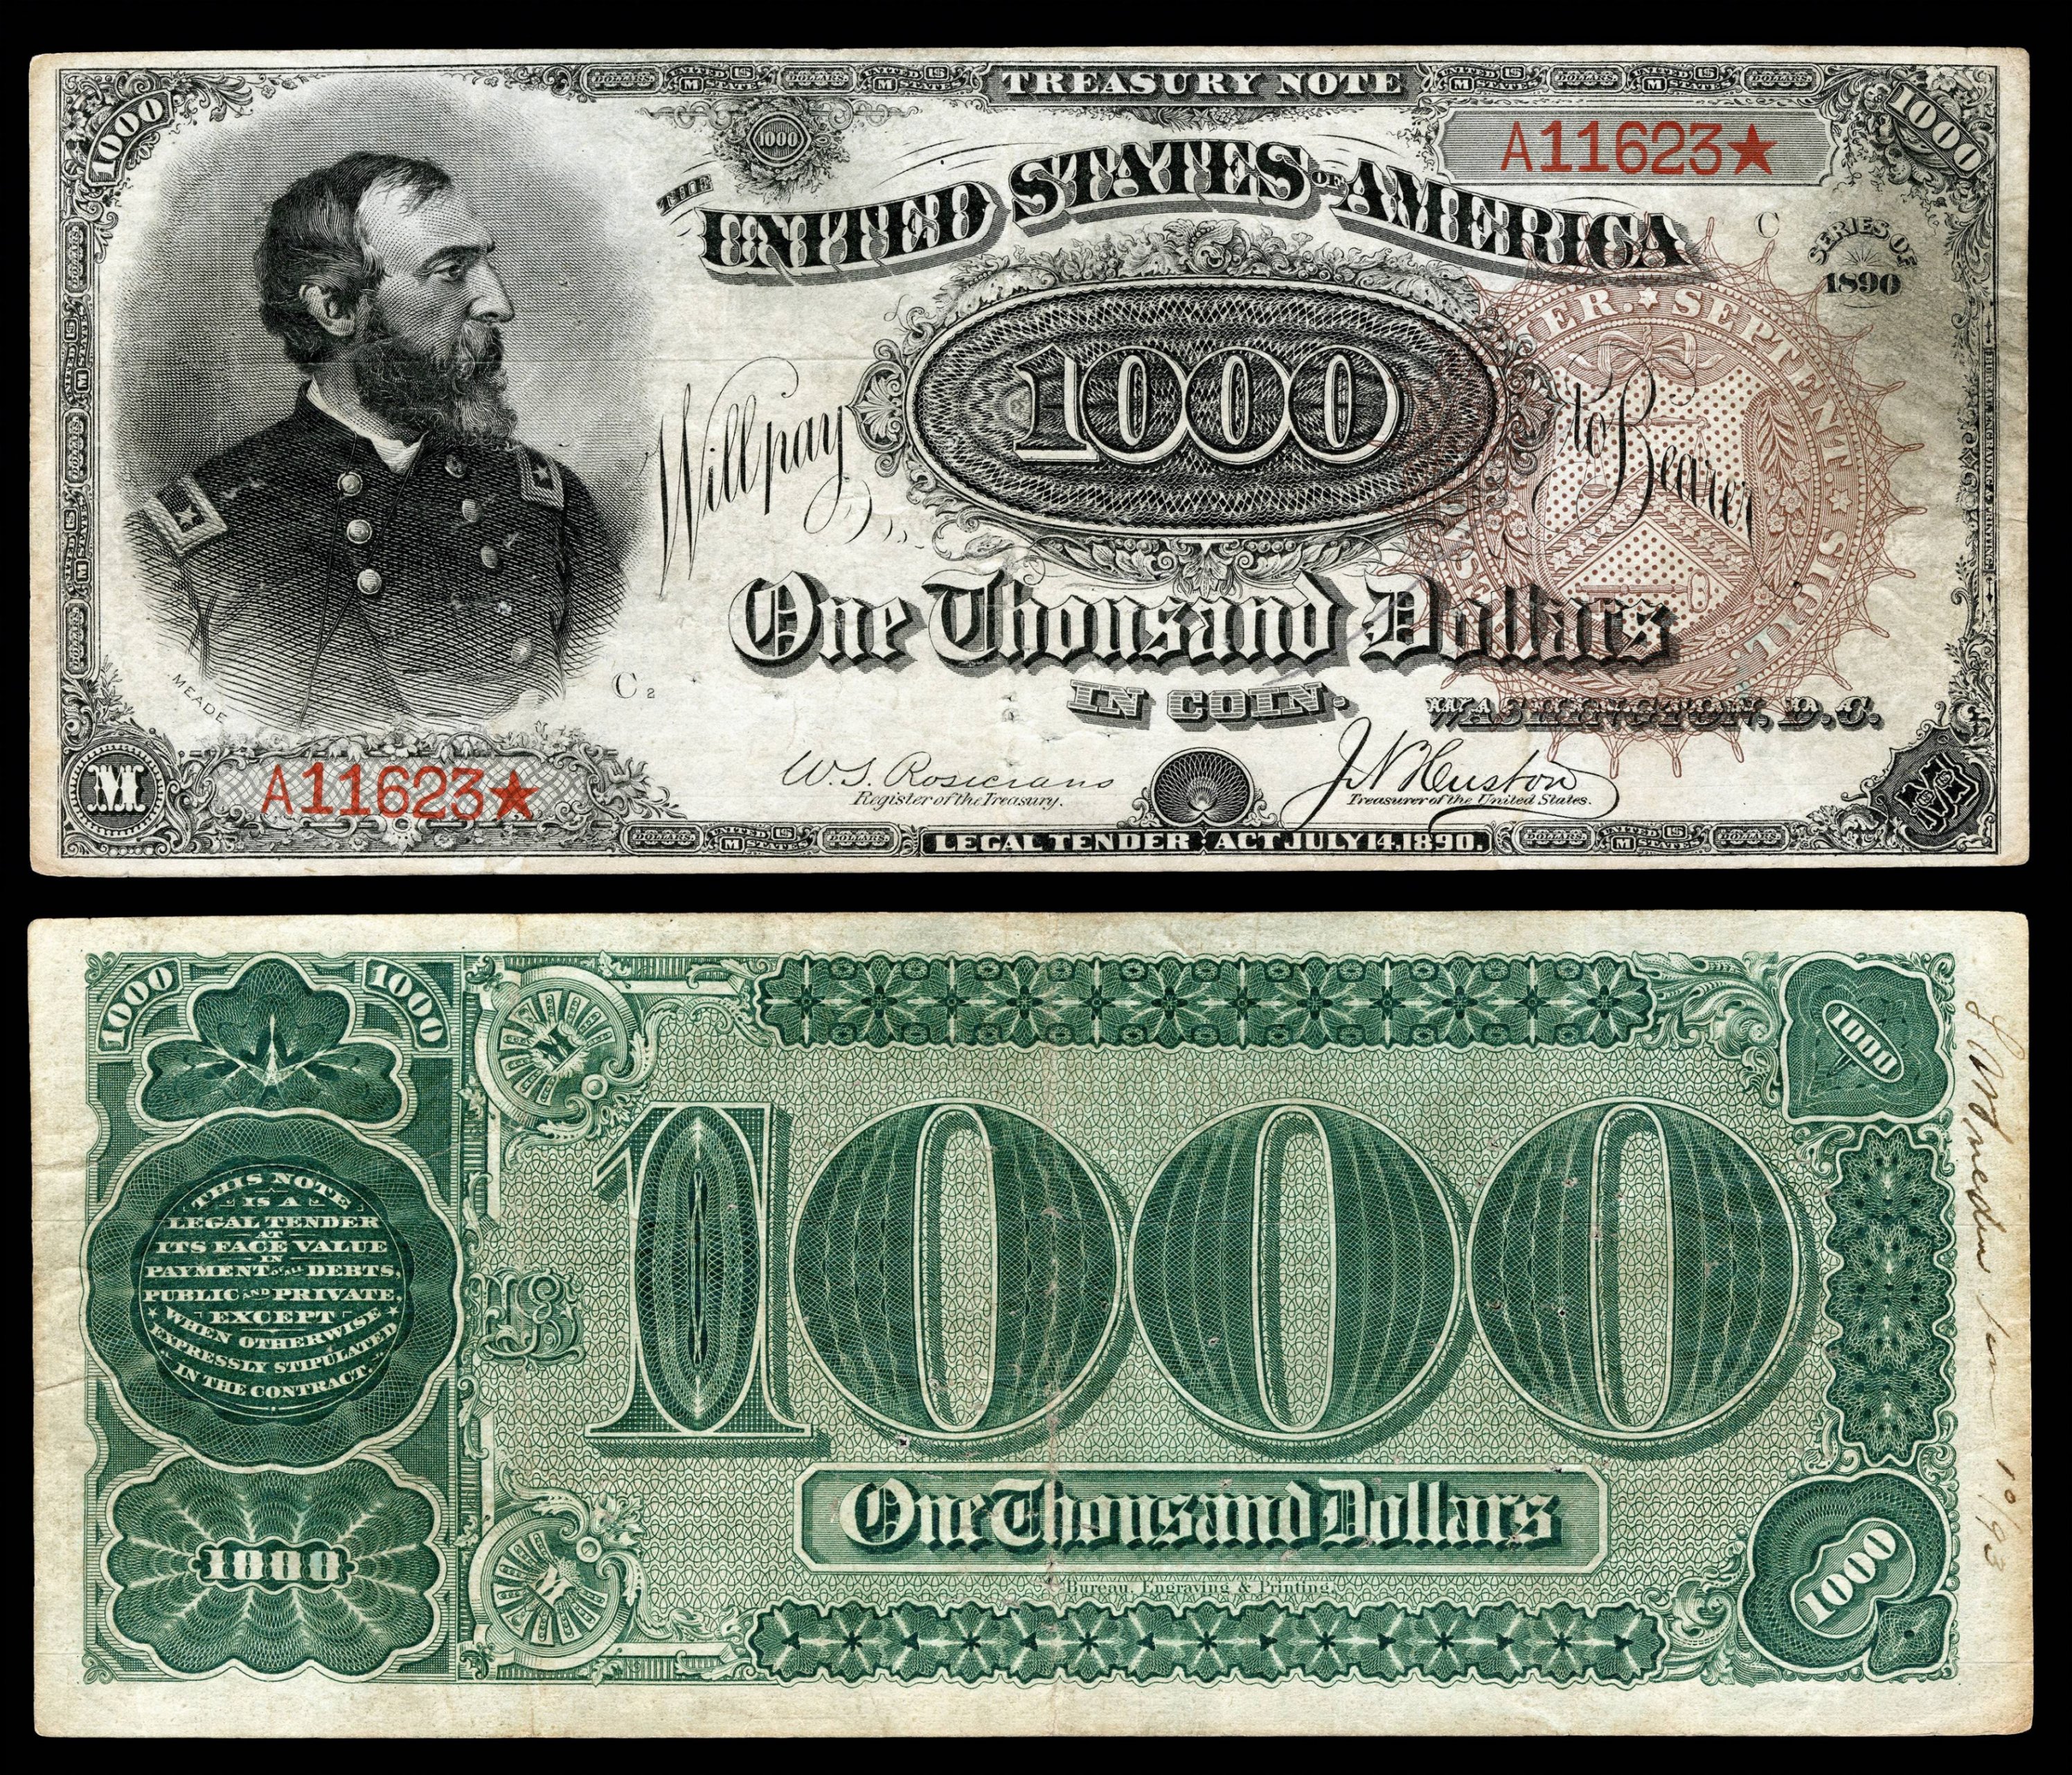 Most Expensive Piece of Paper Currency: 1890 United States Small Seal $1000 Treasury Note.
Price: $3,290,000.